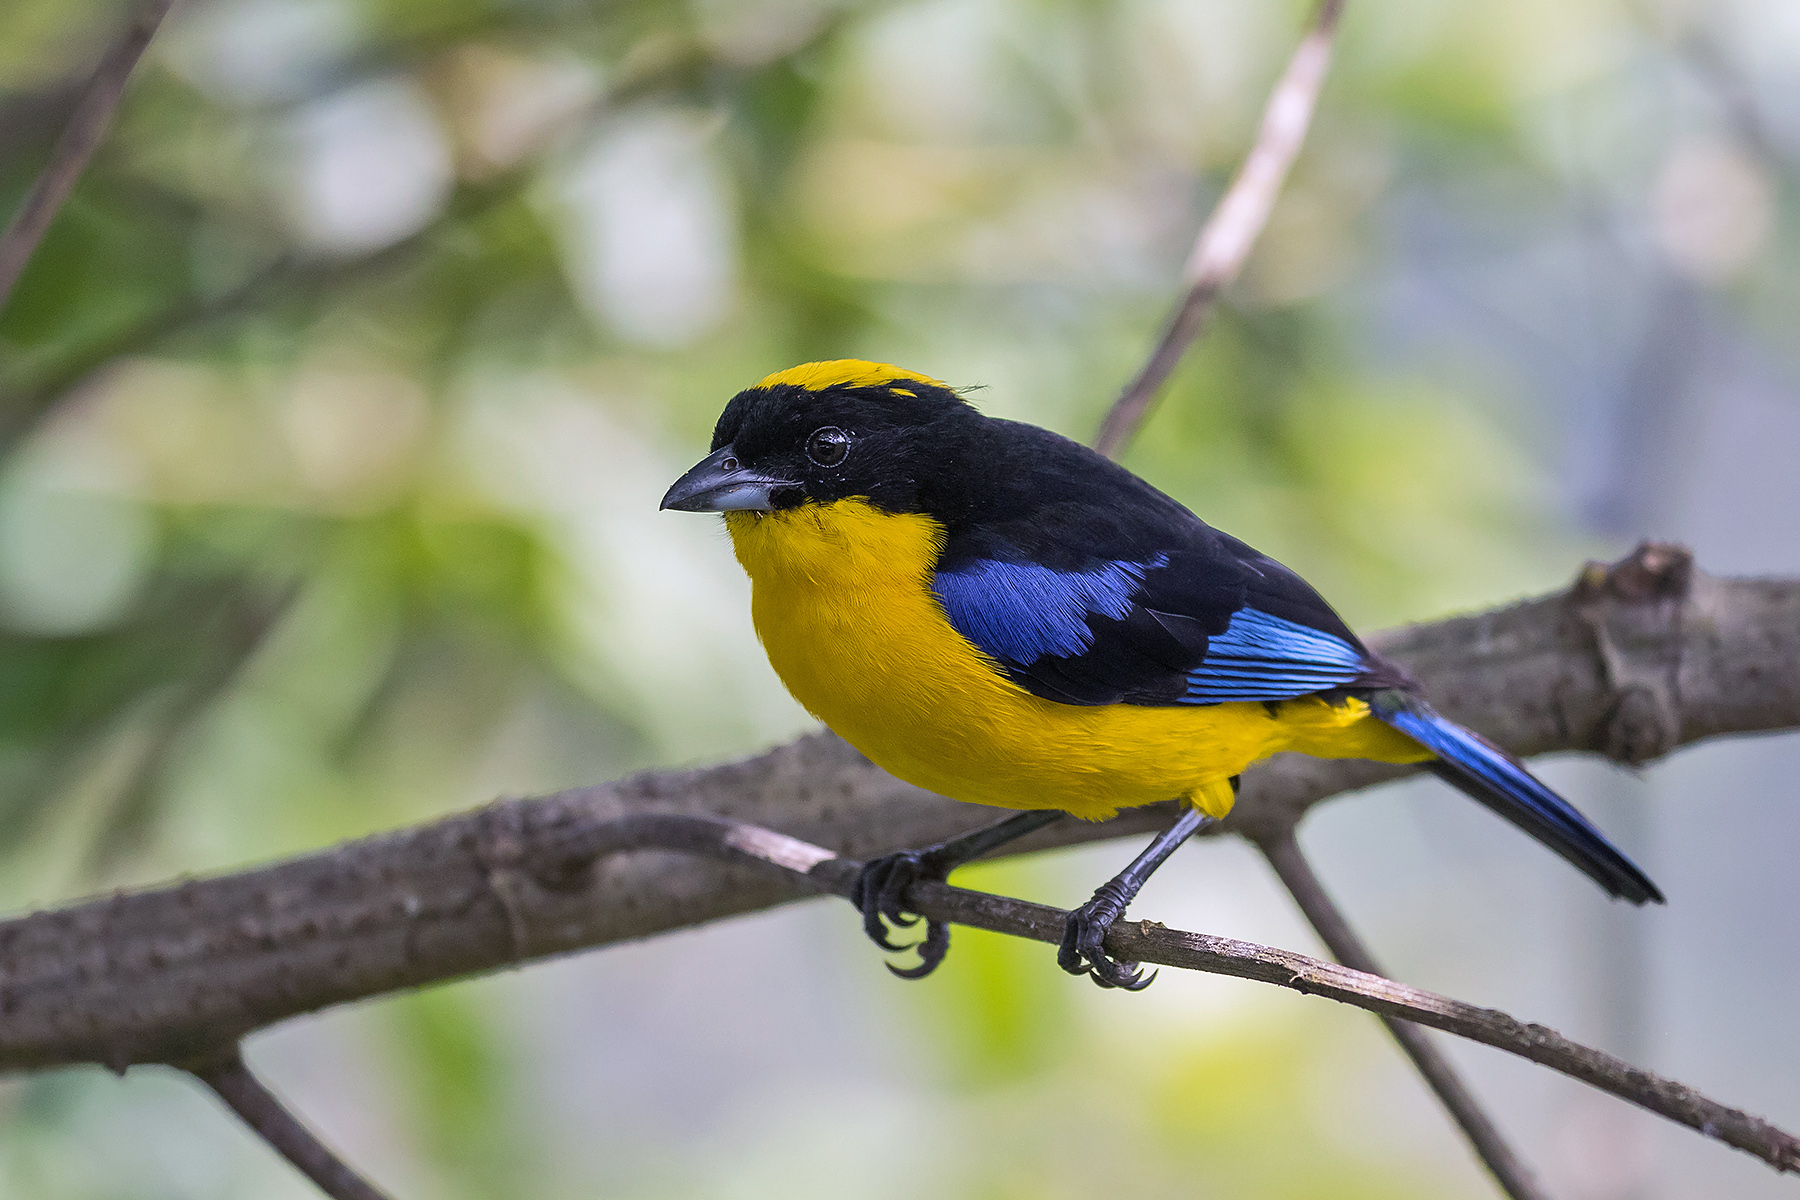 Blue-winged Mountain Tanager in Ecuador (image by Pete Morris)